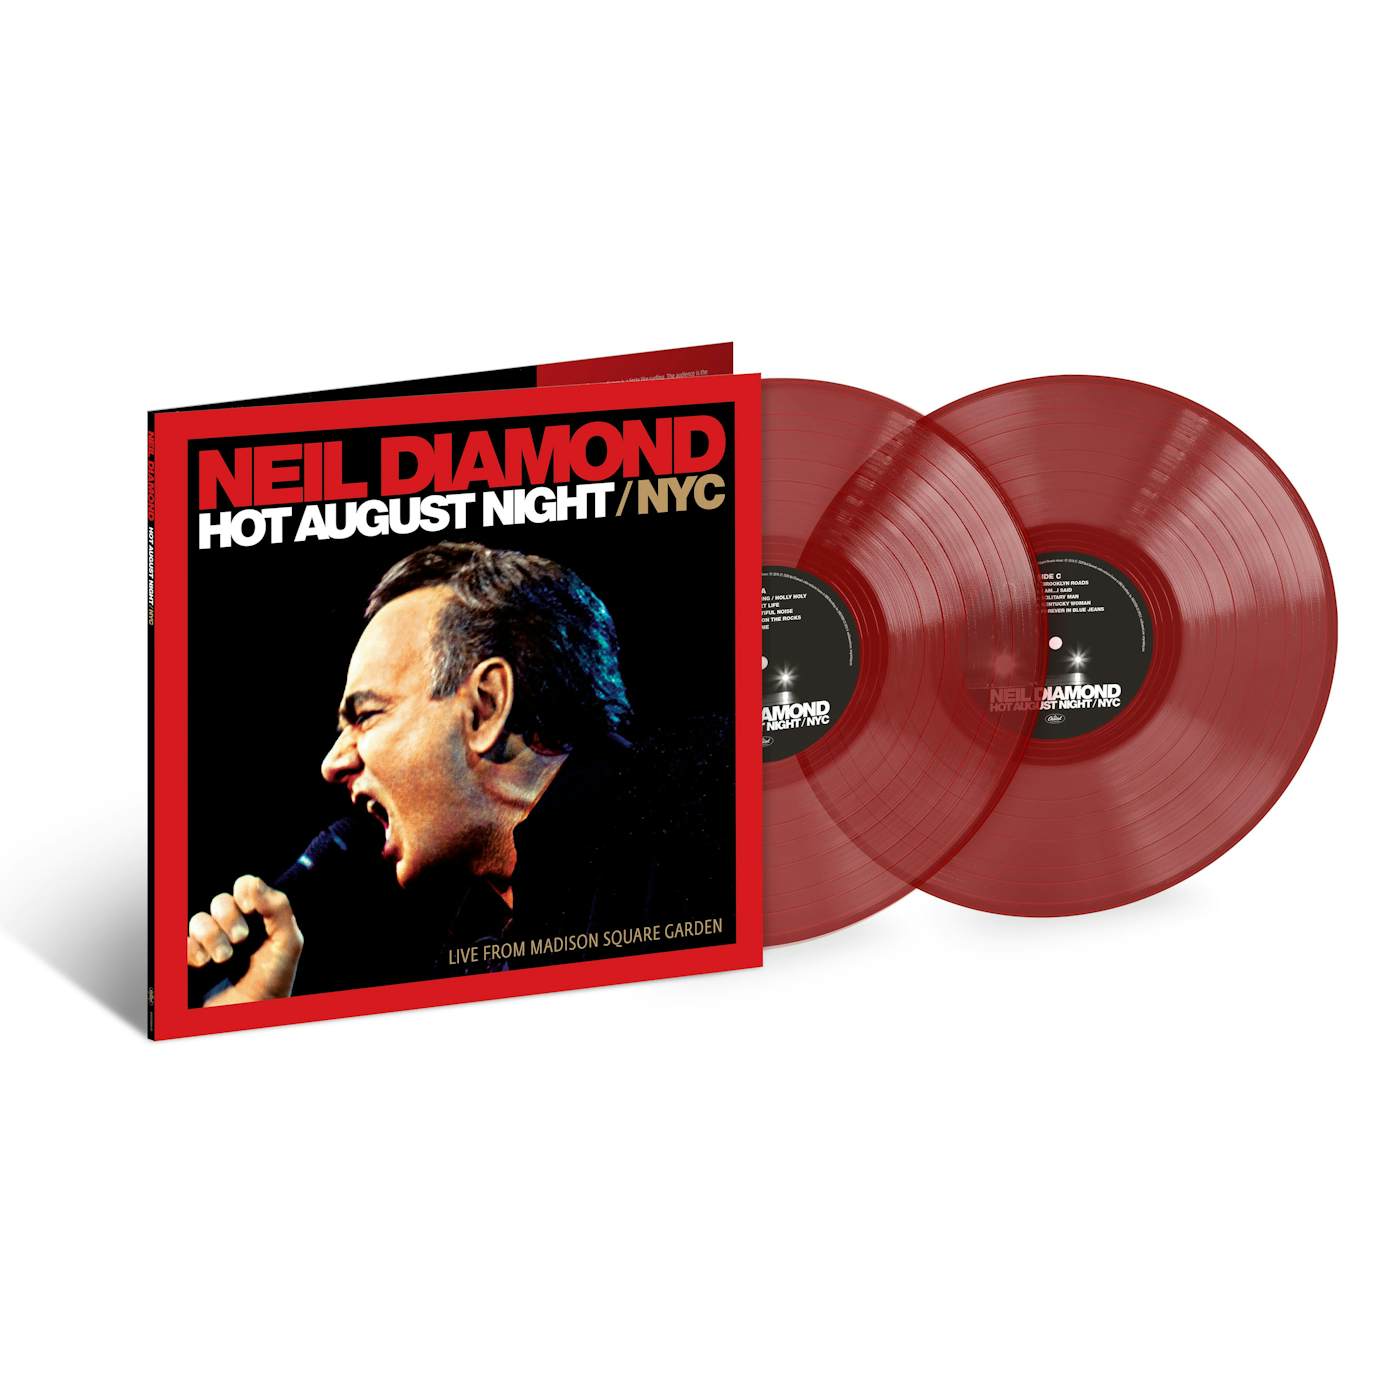 Neil Diamond Hot August Night/NYC Live From Madison Square Garden 2LP CE Translucent Ruby Red (Vinyl)